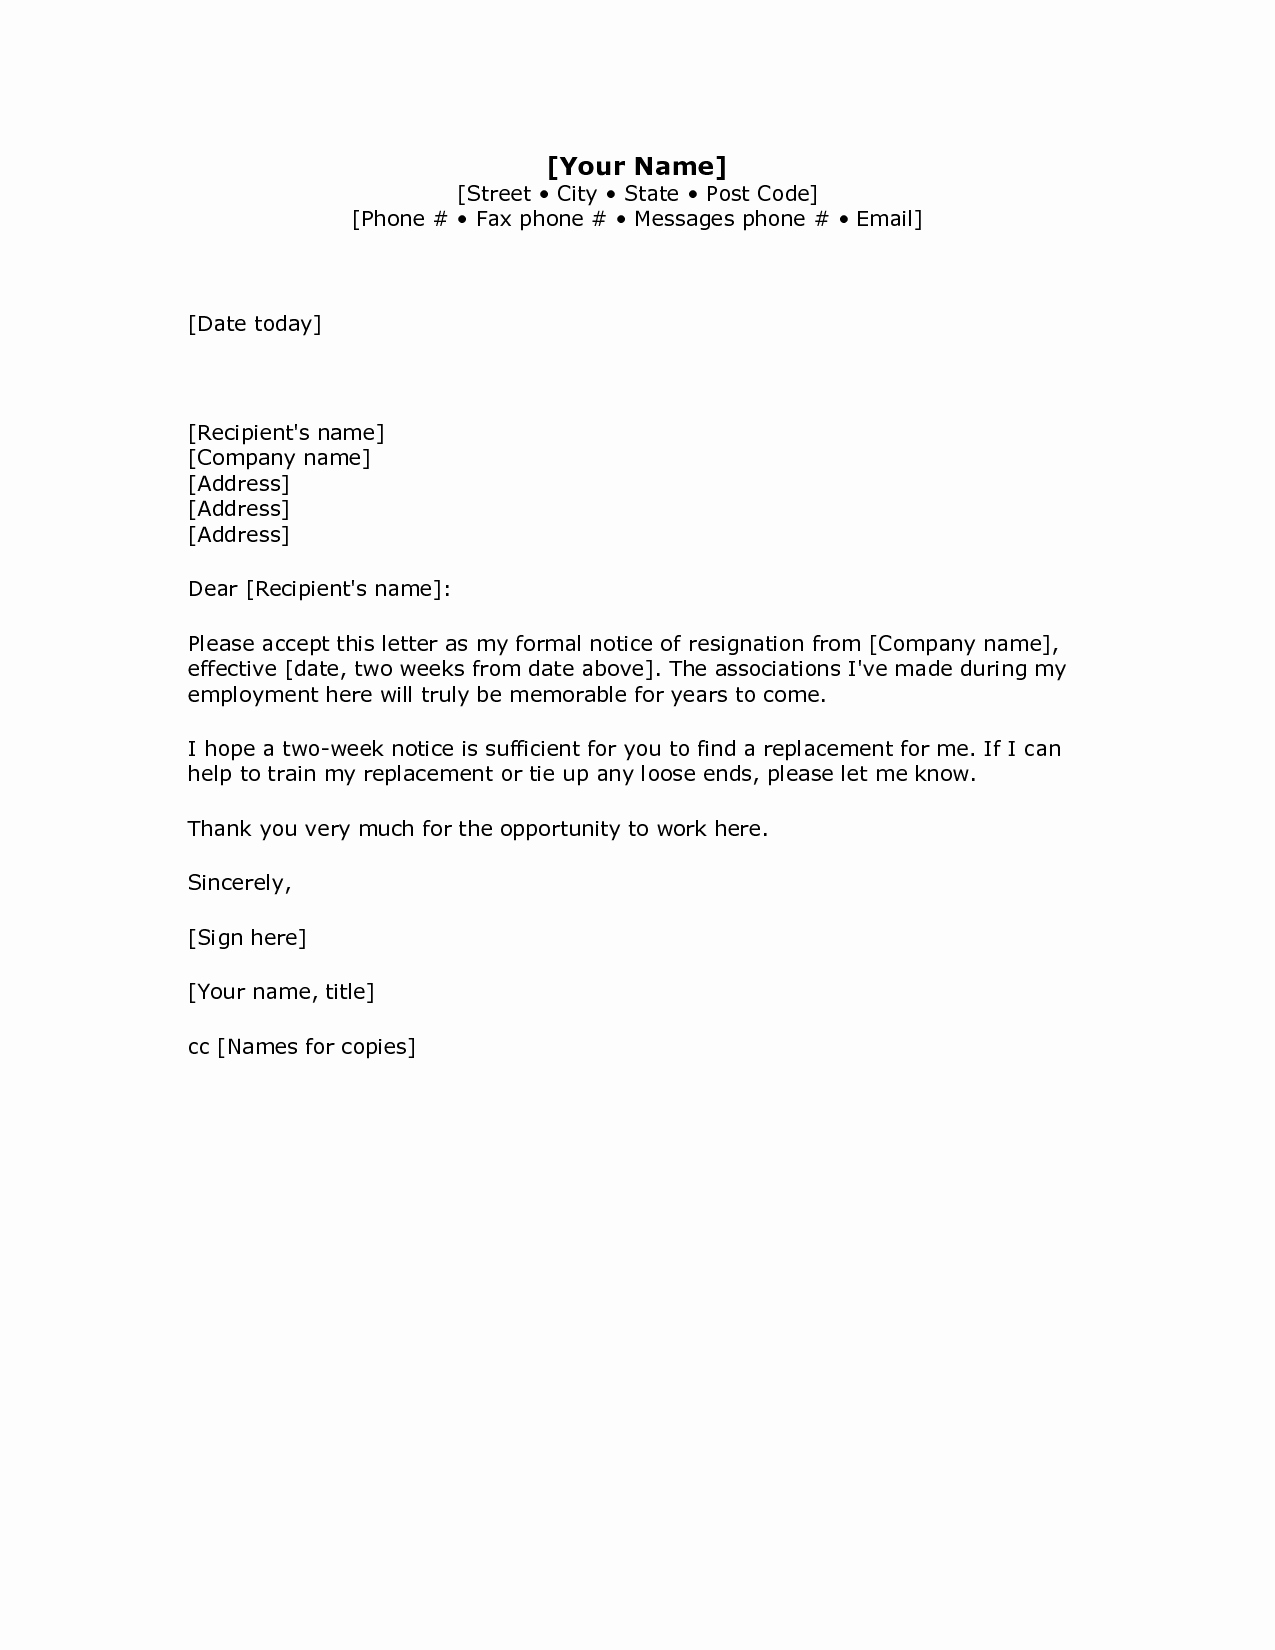 Sample Of Two Weeks Notice Letter New Two Weeks Notice Letter How to Write Guide &amp; Resignation